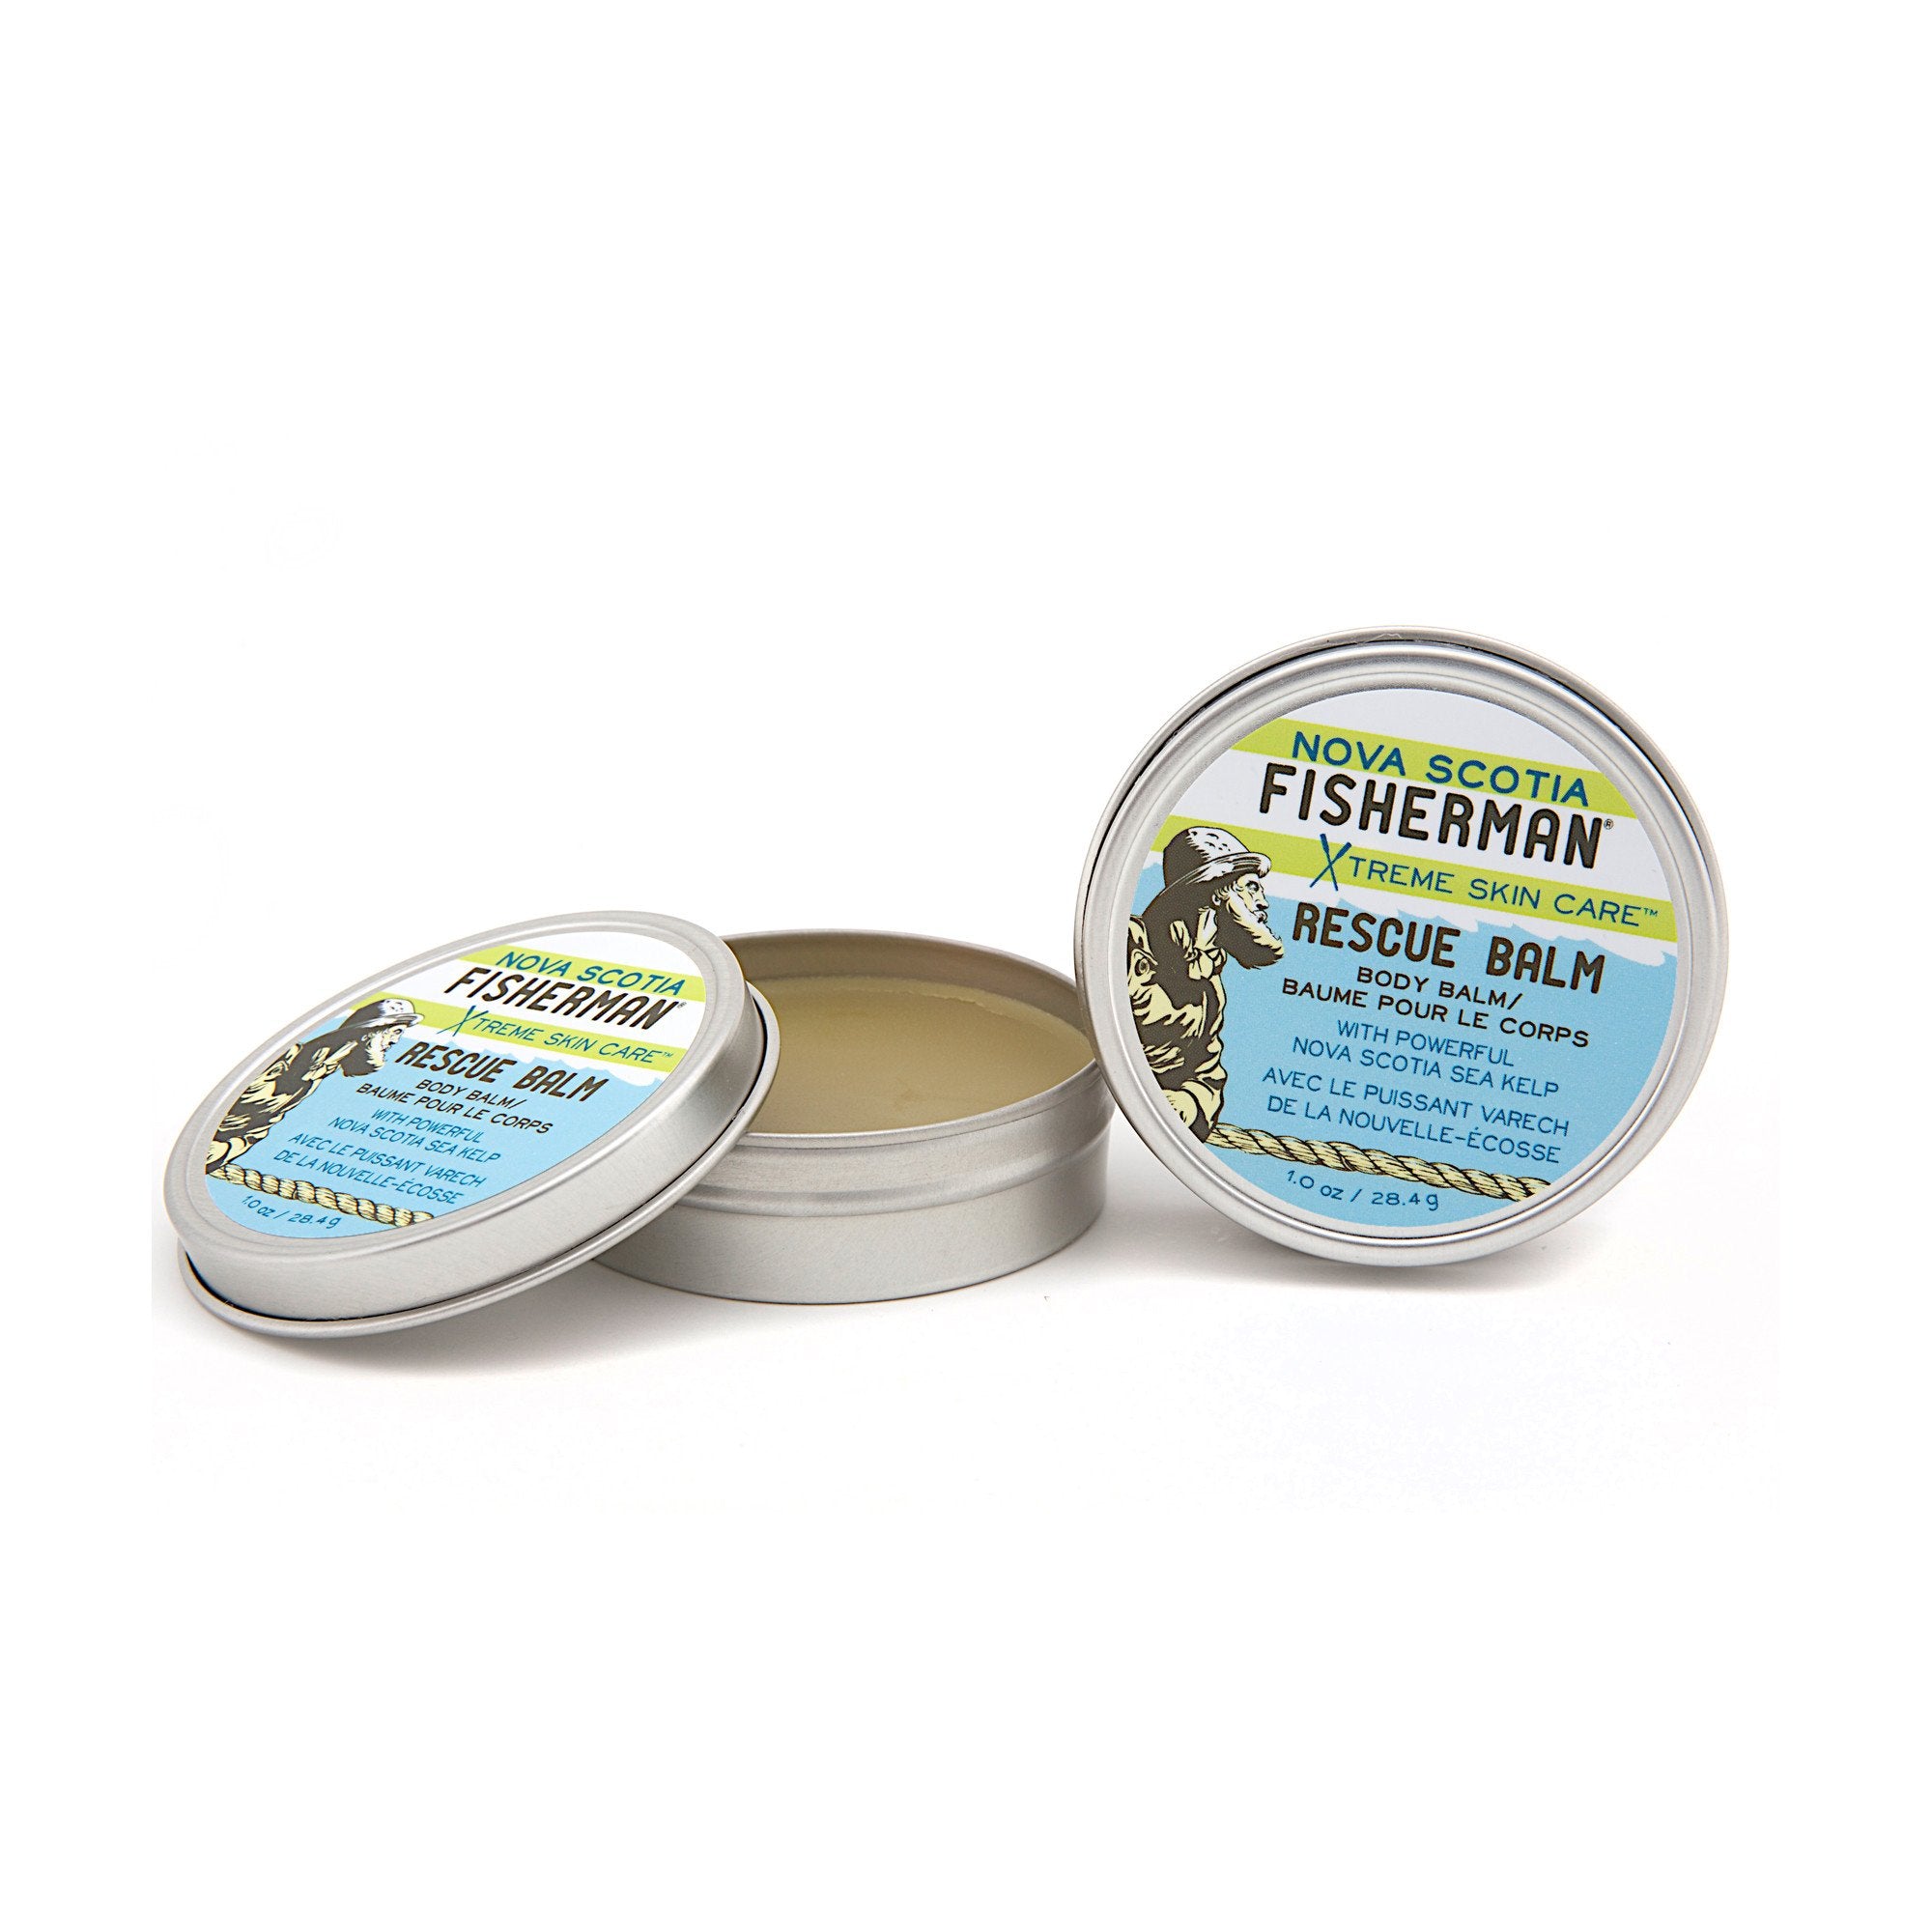 Nova Scotia Fisherman - Rescue Balm All Things Being Eco Chilliwack Natural Beauty Products